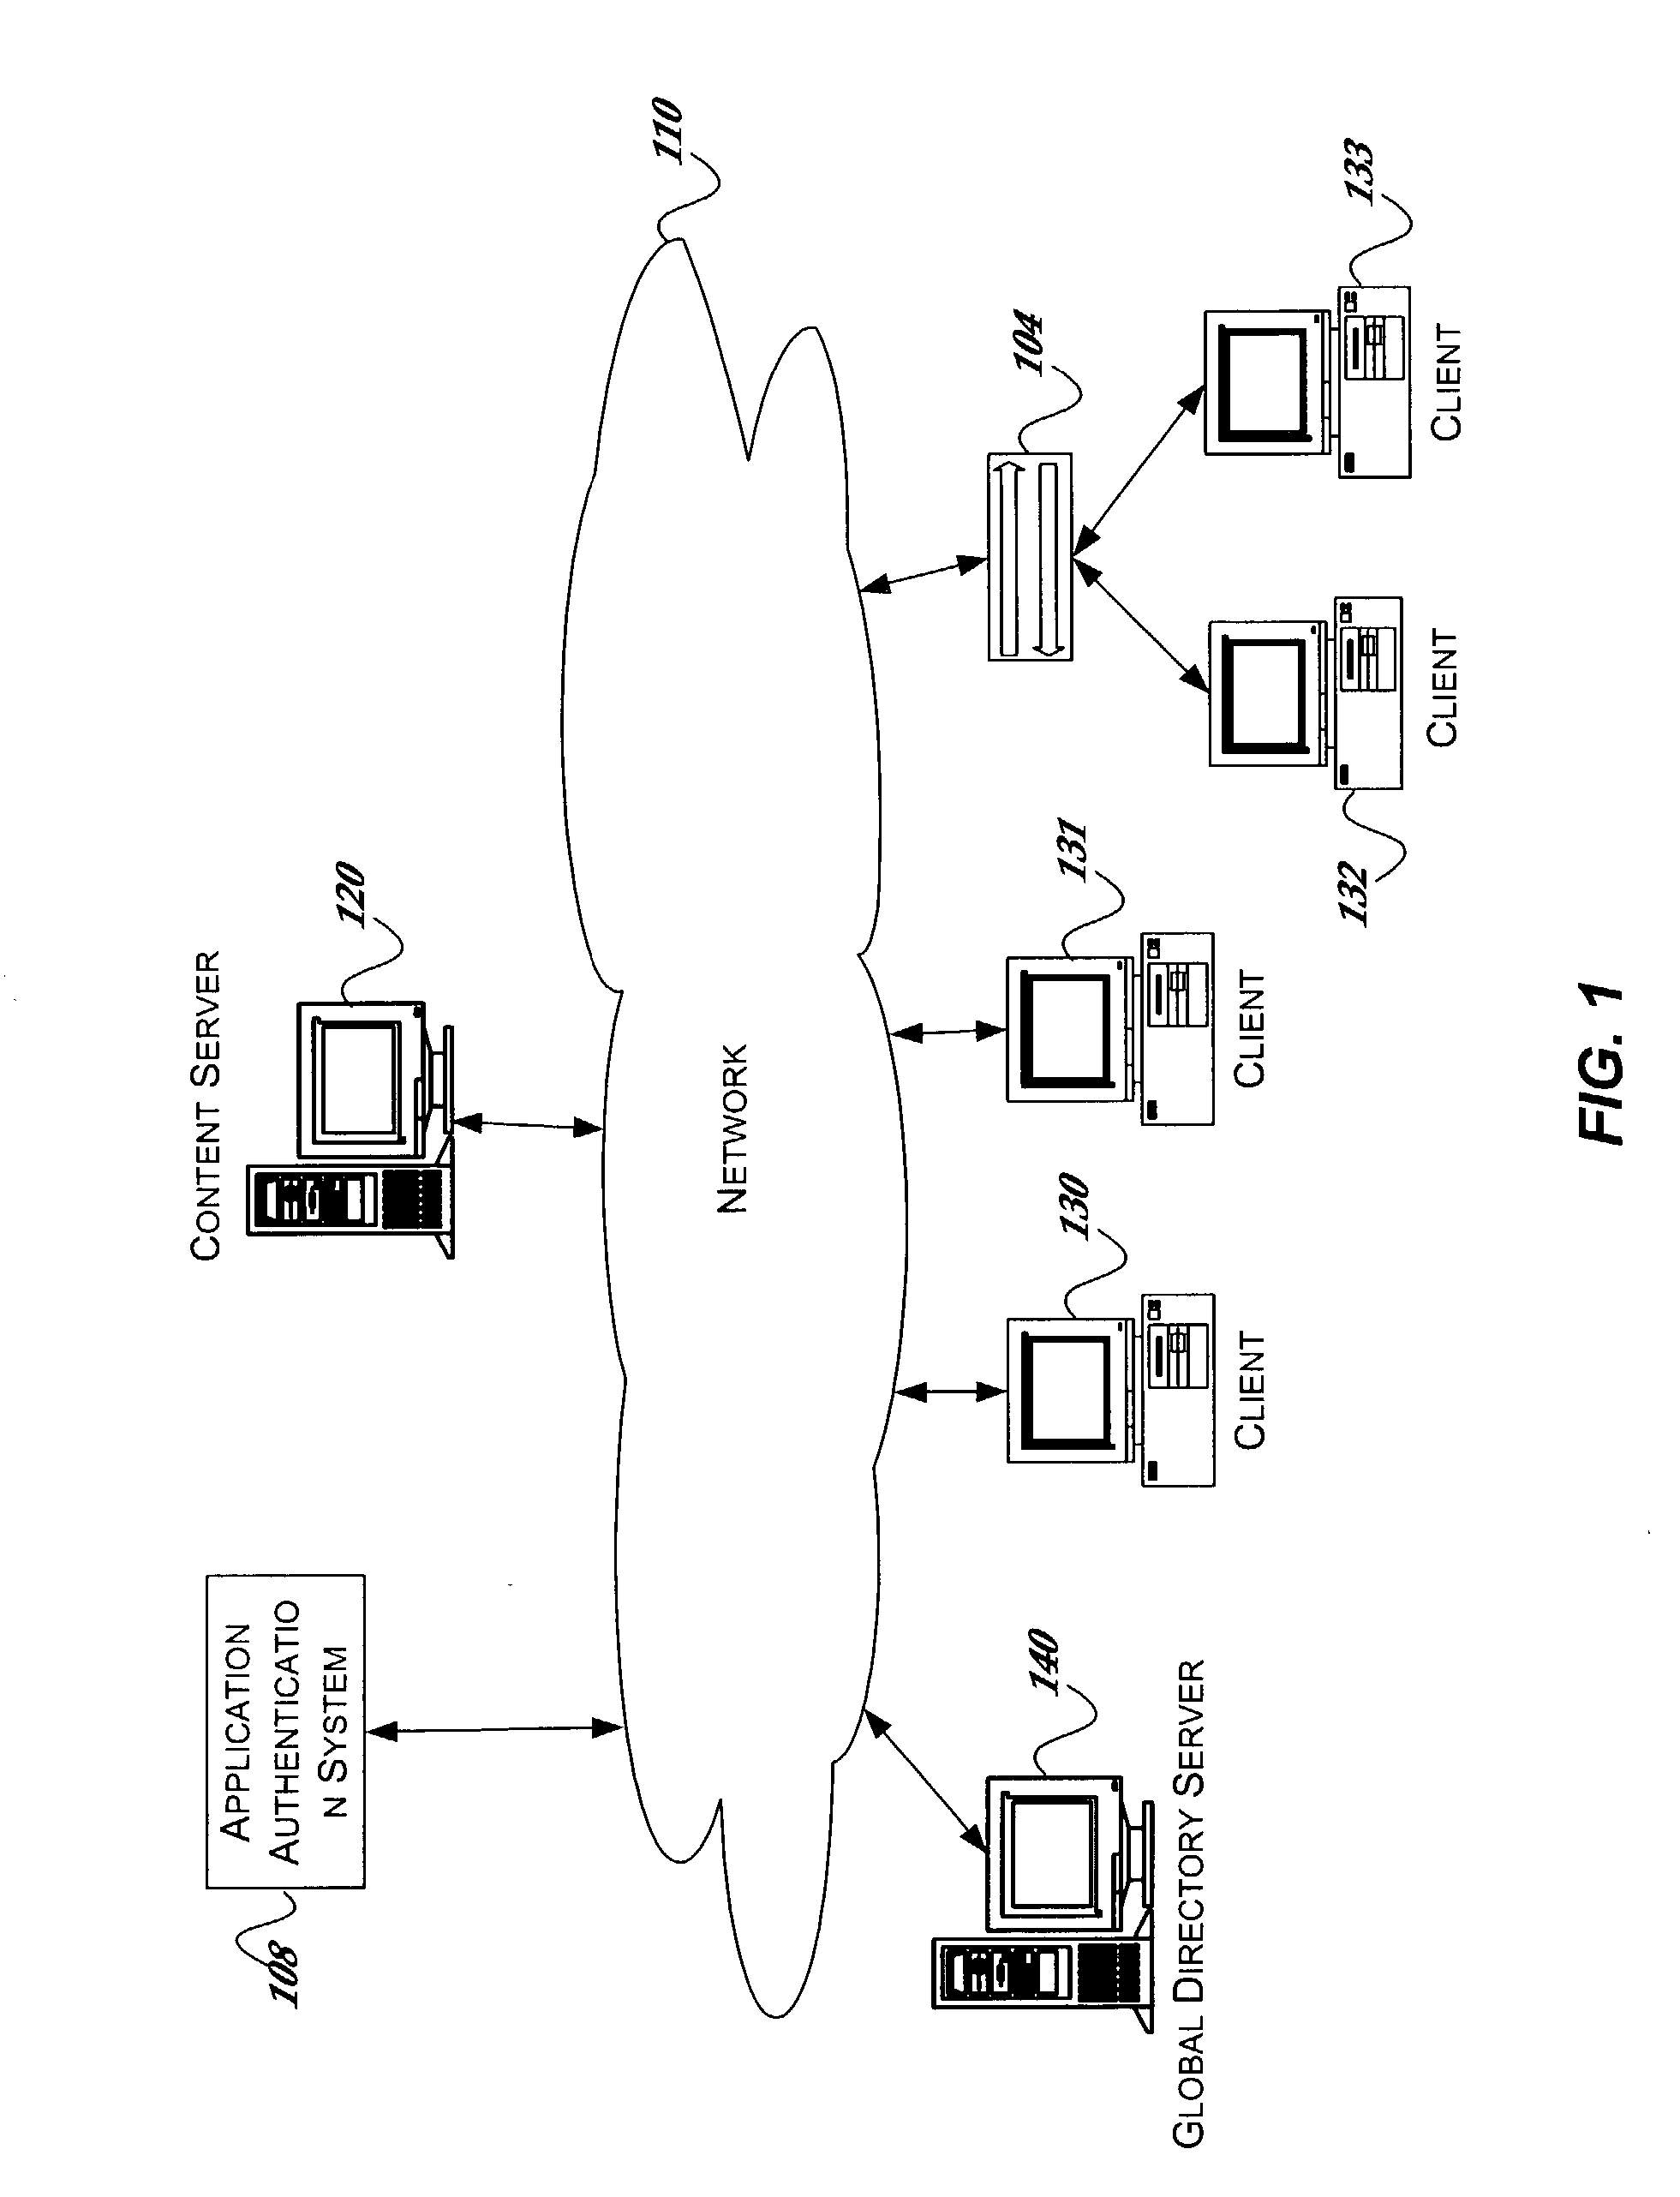 Method and system for enabling content security in a distributed system